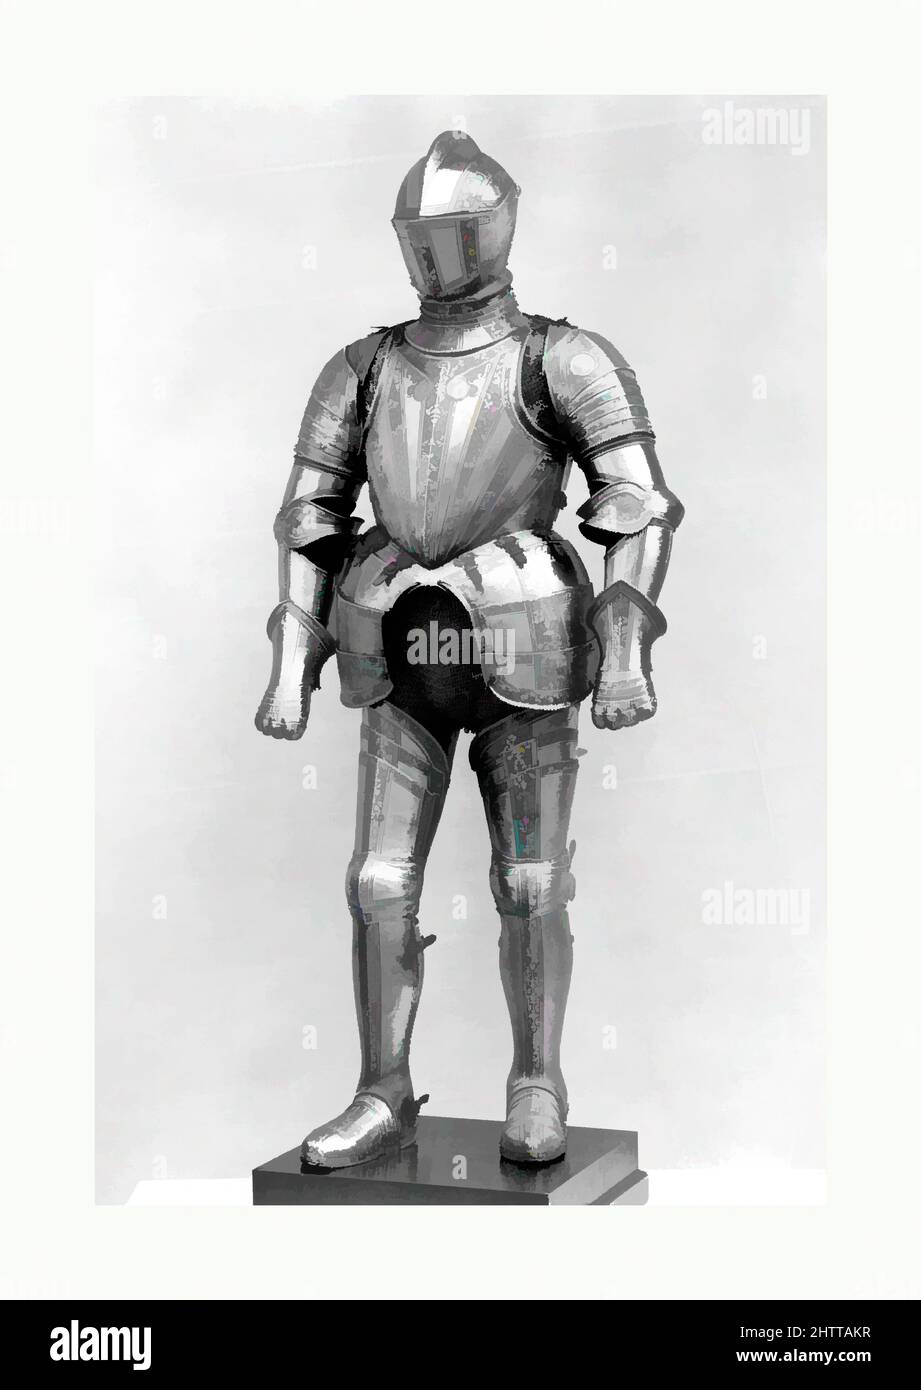 Art inspired by Armor for Field and Tilt, ca. 1550 to 1575, Italian, Steel, Wt. 61 lb. 10 oz. (27.95 kg); helmet (a); H. 12 1/2 in. (31.8 cm); W. 8 1/2 in. (21.6 cm); D. 12 1/2 in. (31.8 cm); Wt. 10 lb. 1 oz. (4564.3 g); gorget (b); H. 7 3/8 in. (18.7 cm); W. 12 in. (30.5 cm); D. 10 1/, Classic works modernized by Artotop with a splash of modernity. Shapes, color and value, eye-catching visual impact on art. Emotions through freedom of artworks in a contemporary way. A timeless message pursuing a wildly creative new direction. Artists turning to the digital medium and creating the Artotop NFT Stock Photo